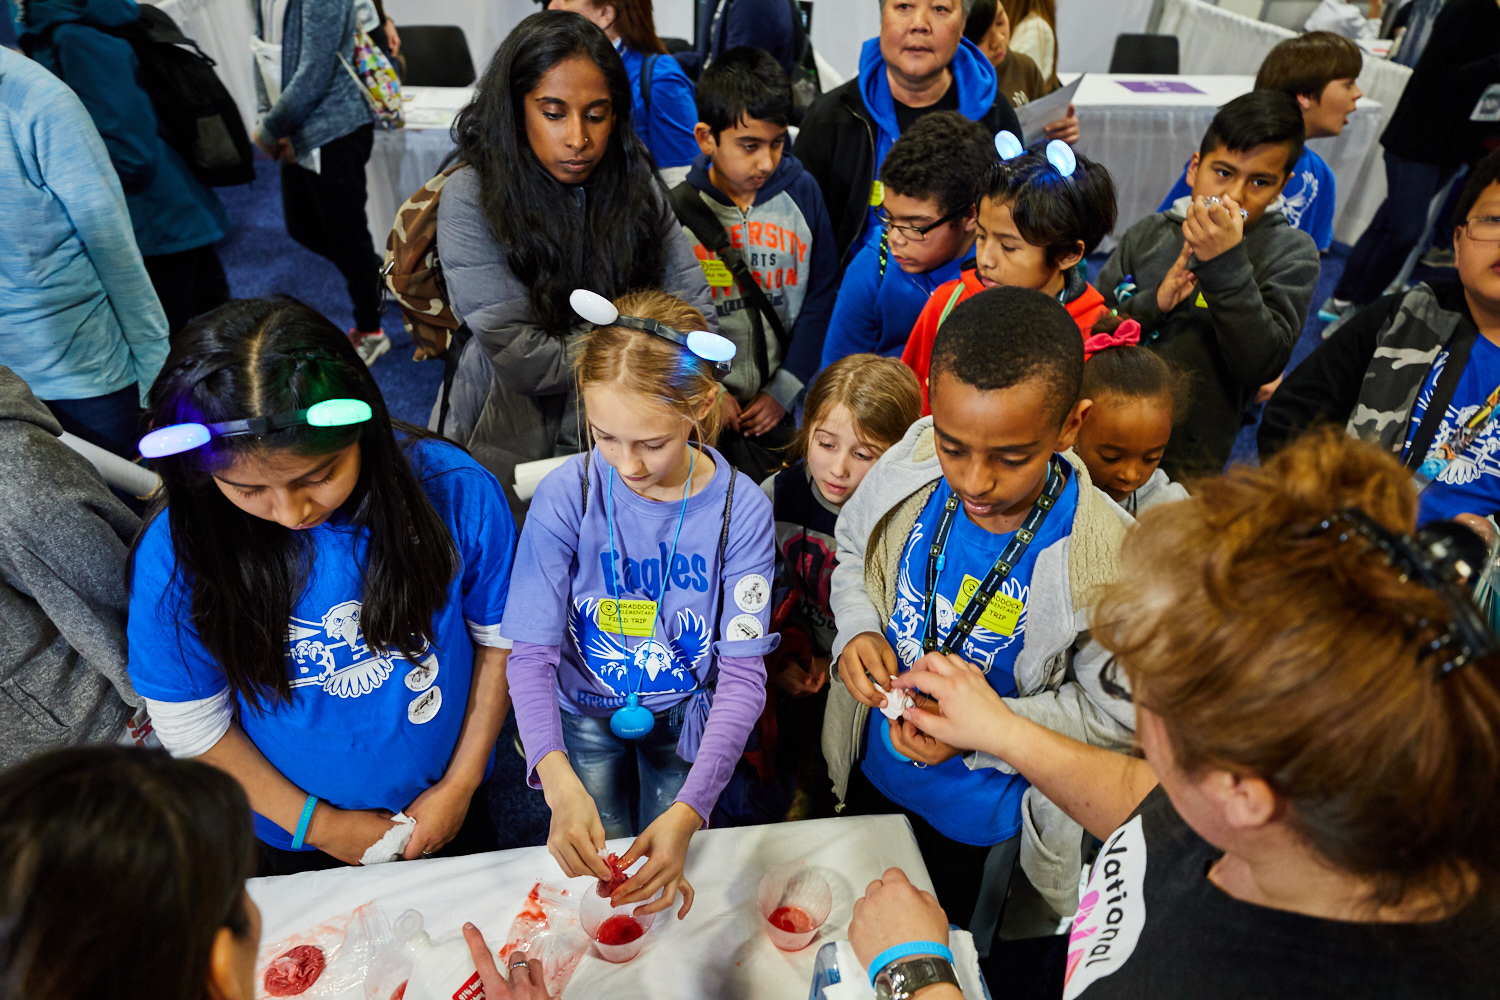 Children participate in the 2018 USA Science and Engineering Festival